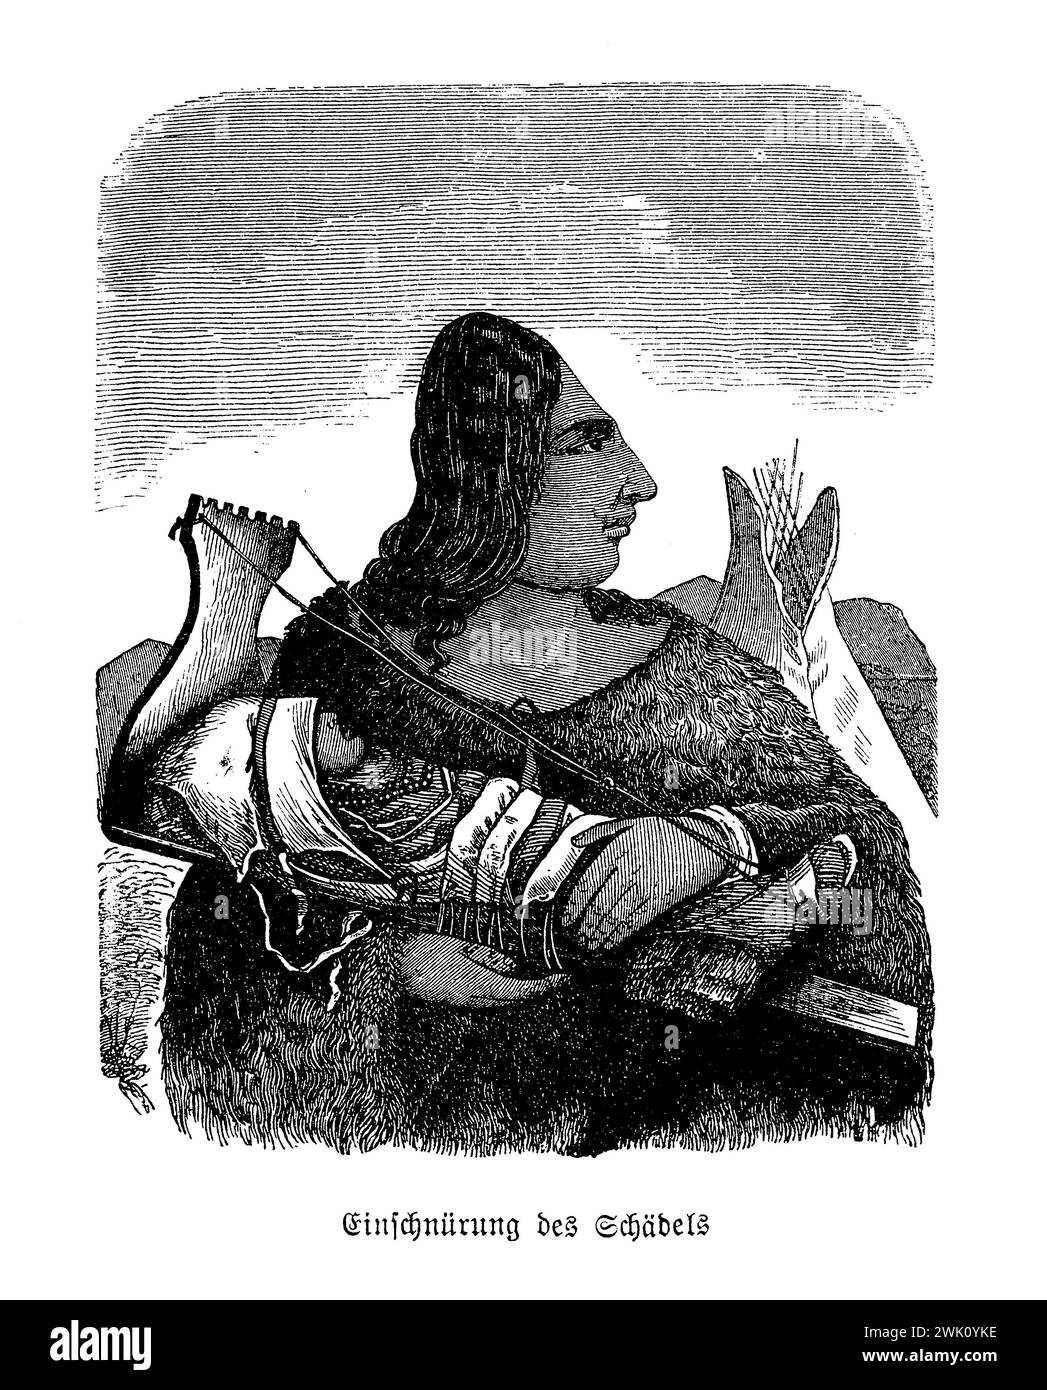 Head binding practice by a native American woman of the Chinookan tribe, the child head was bound between wooden boards, 19th century illustration Stock Photo